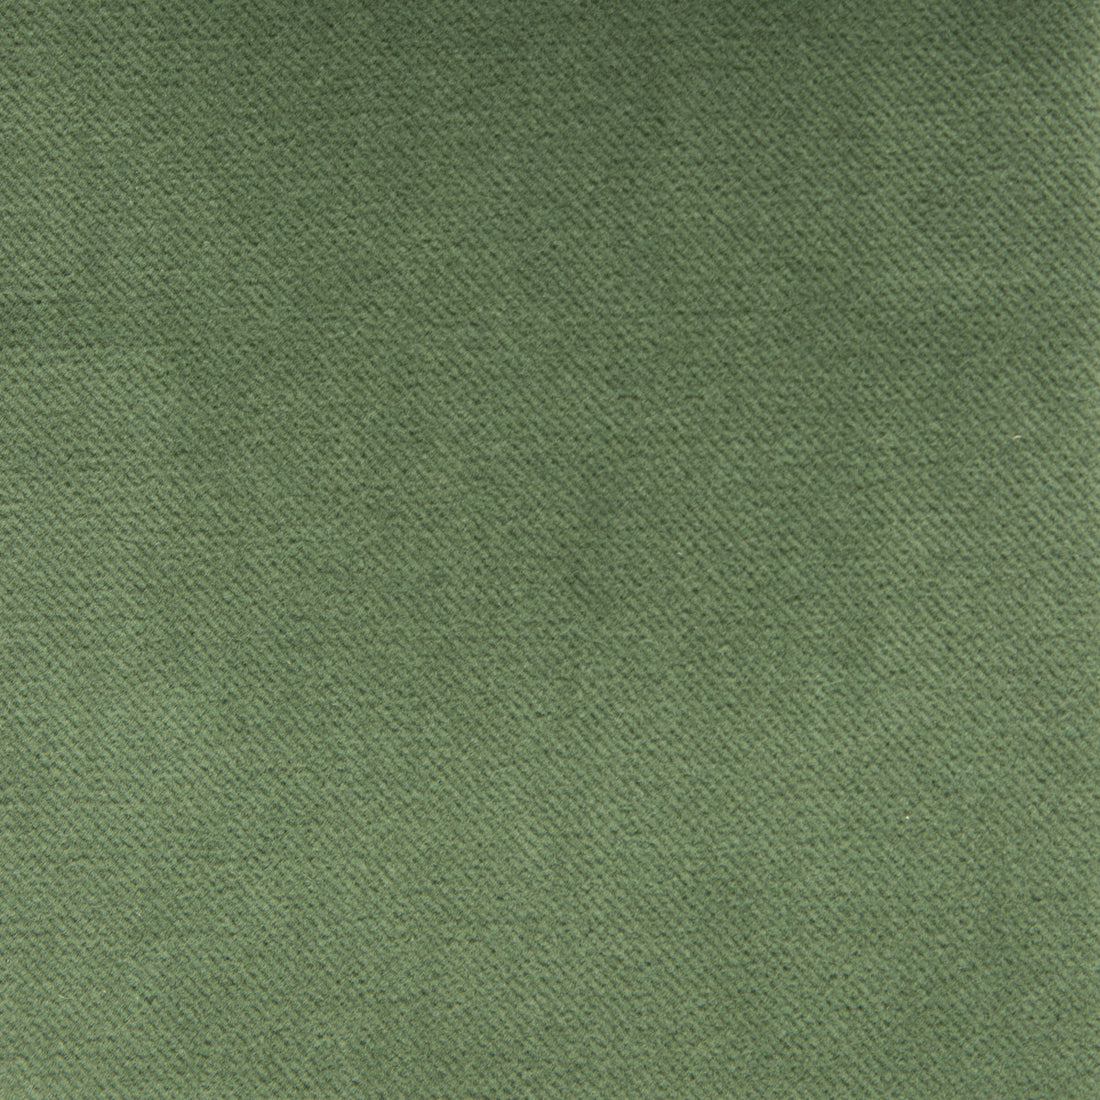 Venecia fabric in verde color - pattern GDT5230.021.0 - by Gaston y Daniela in the Basics collection